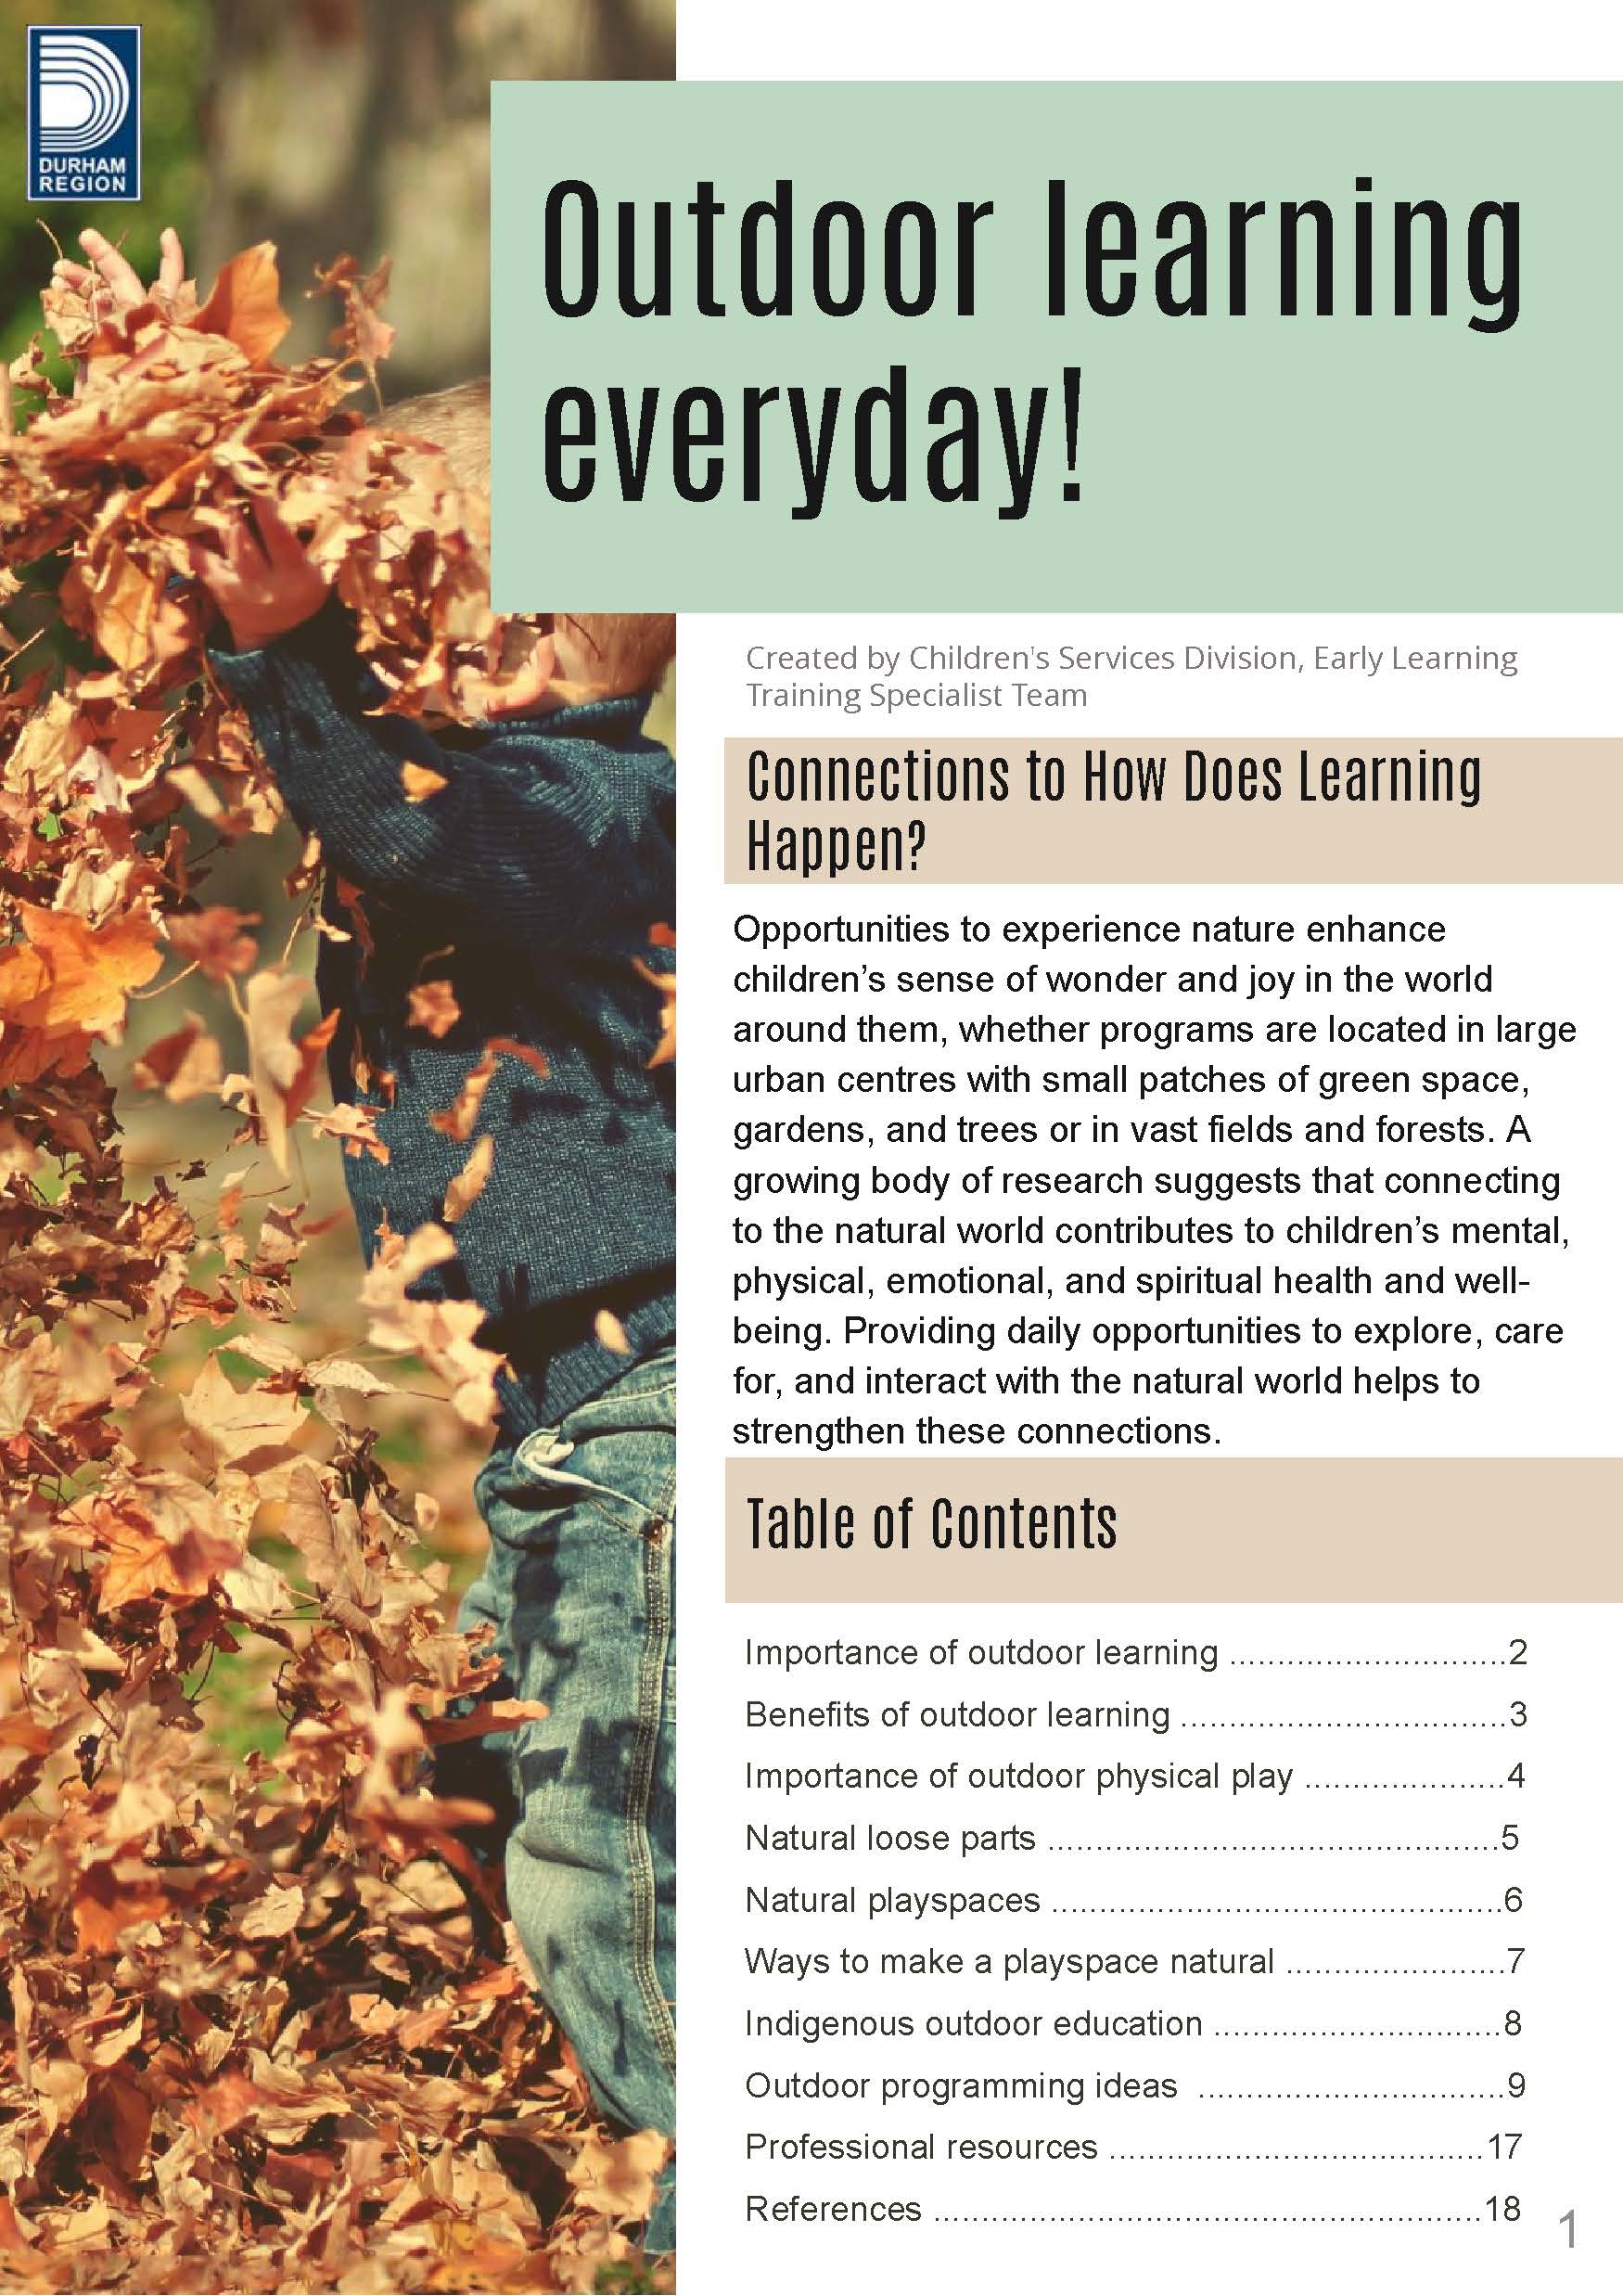 Outdoor Learning everyday resource guide